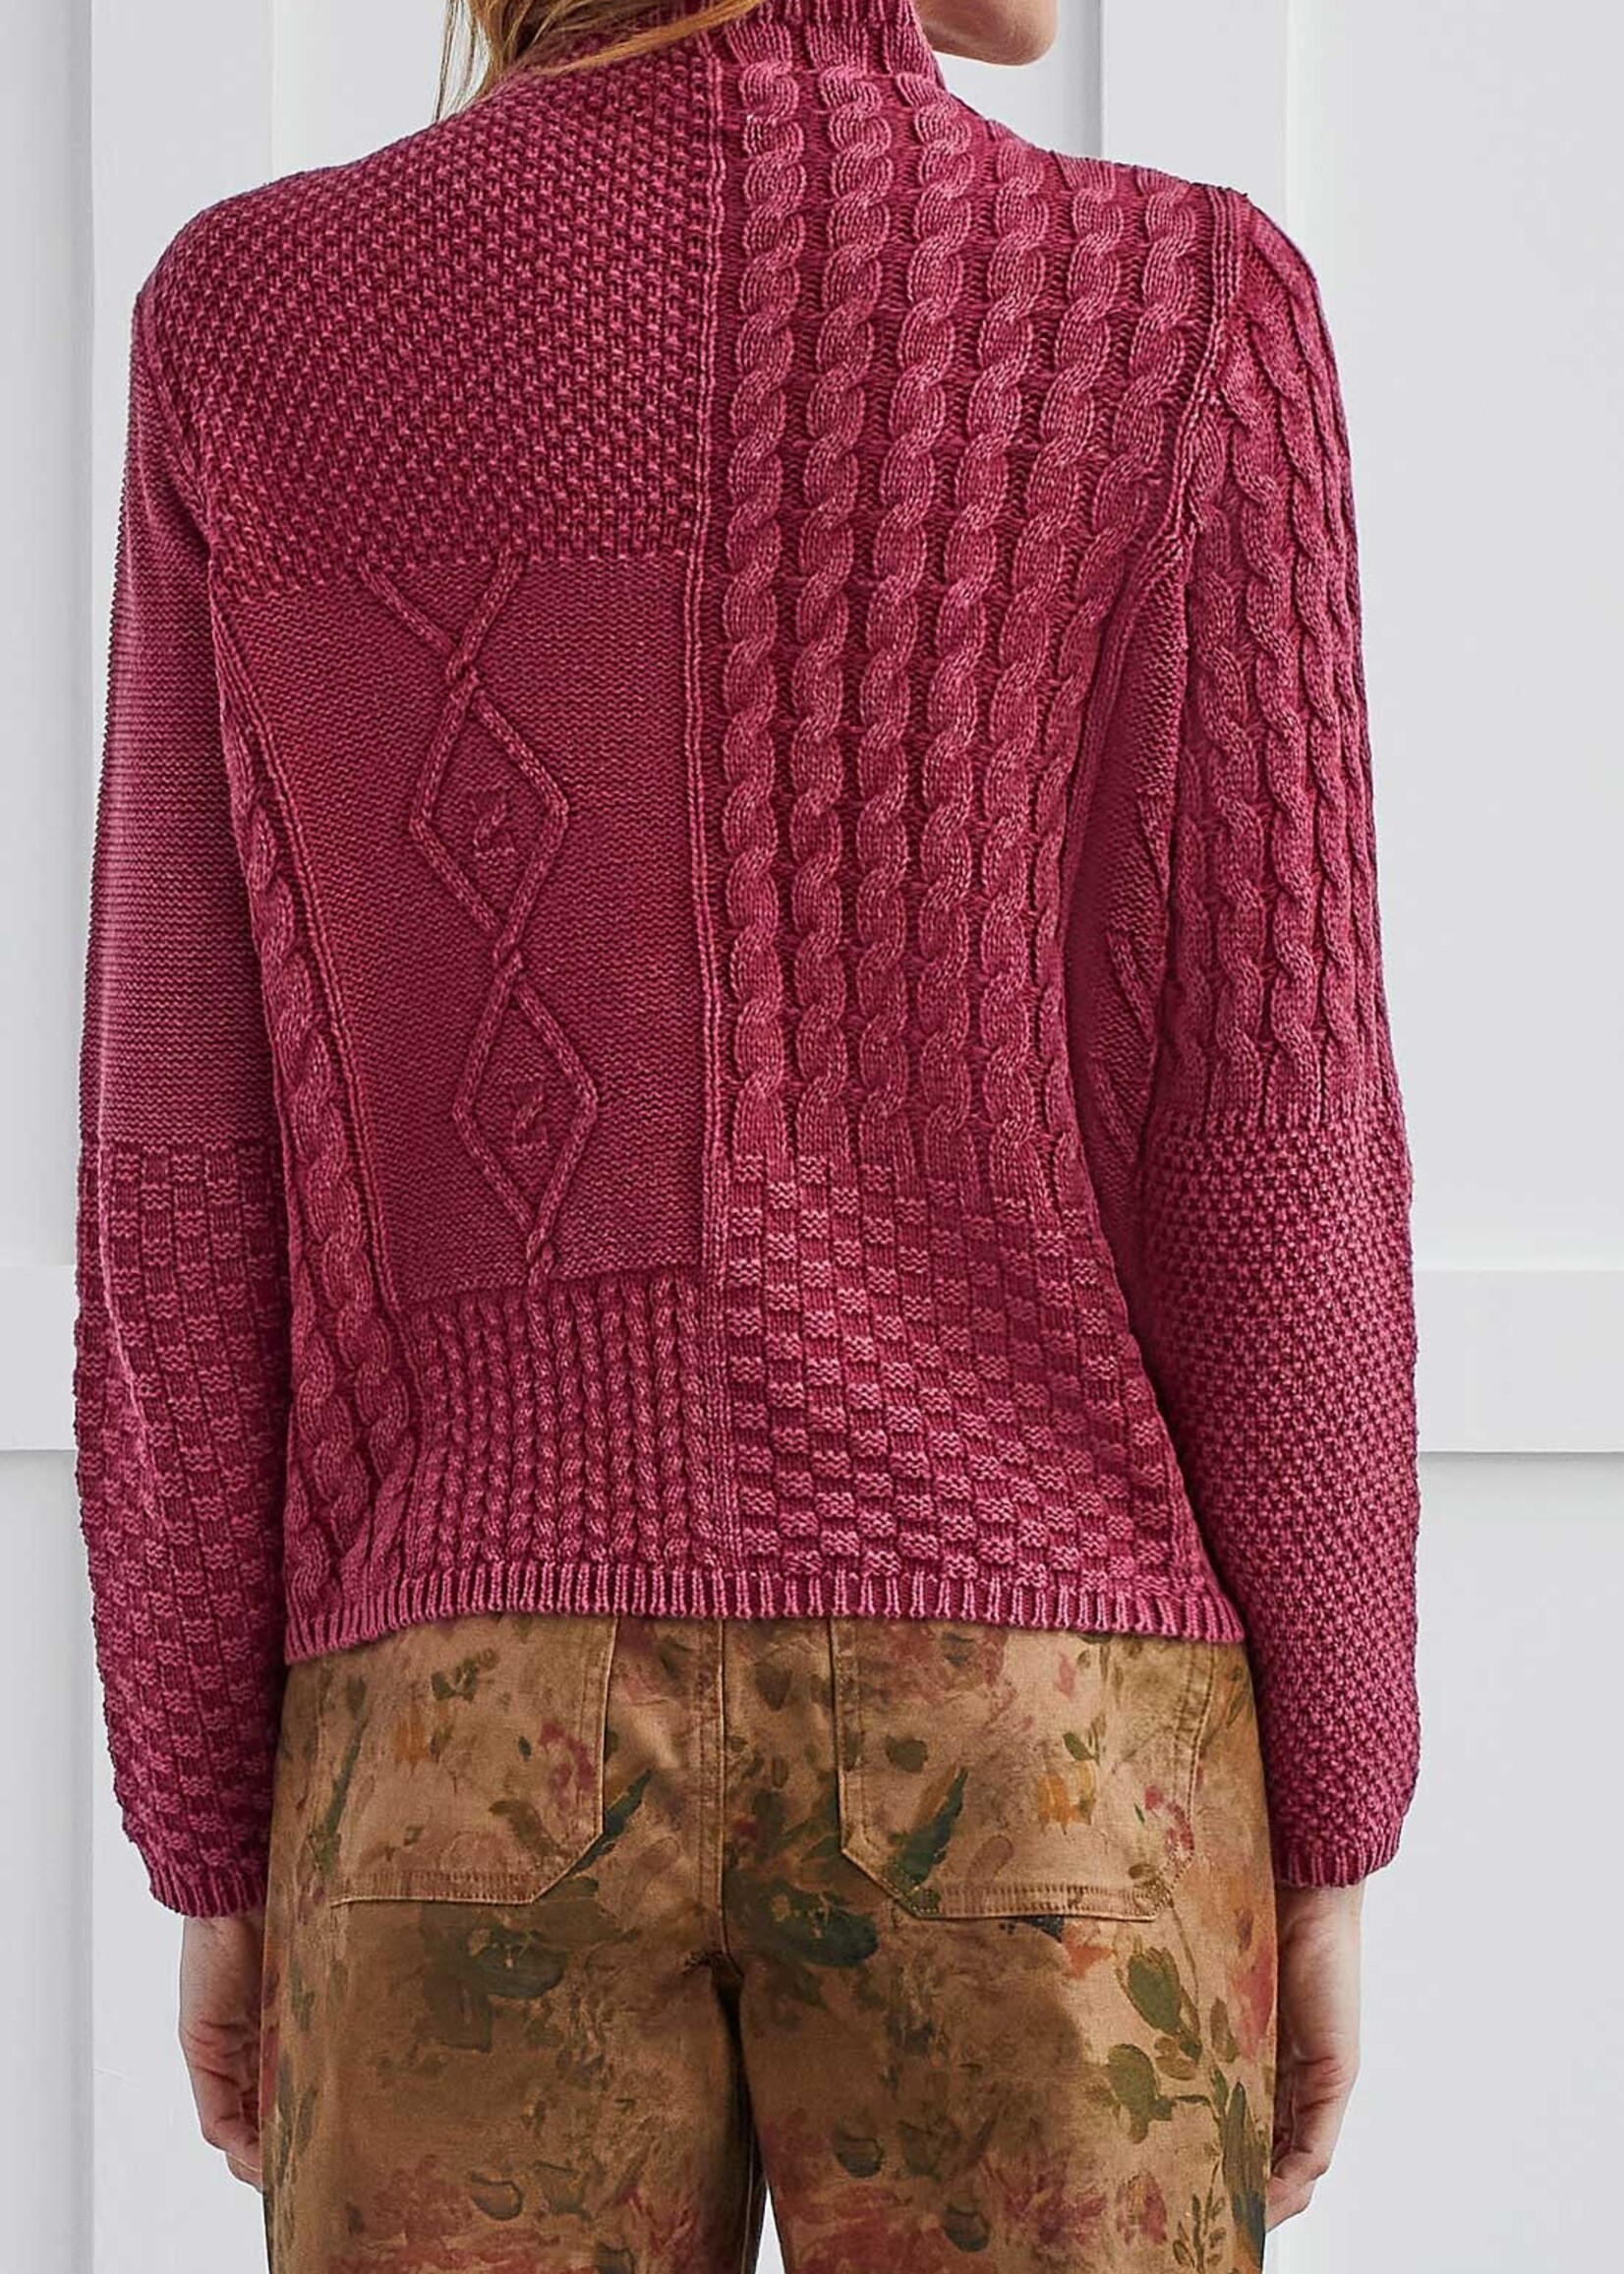 Tribal Tribal Funnel Neck Vintage Look Knit Sweater Red Plum